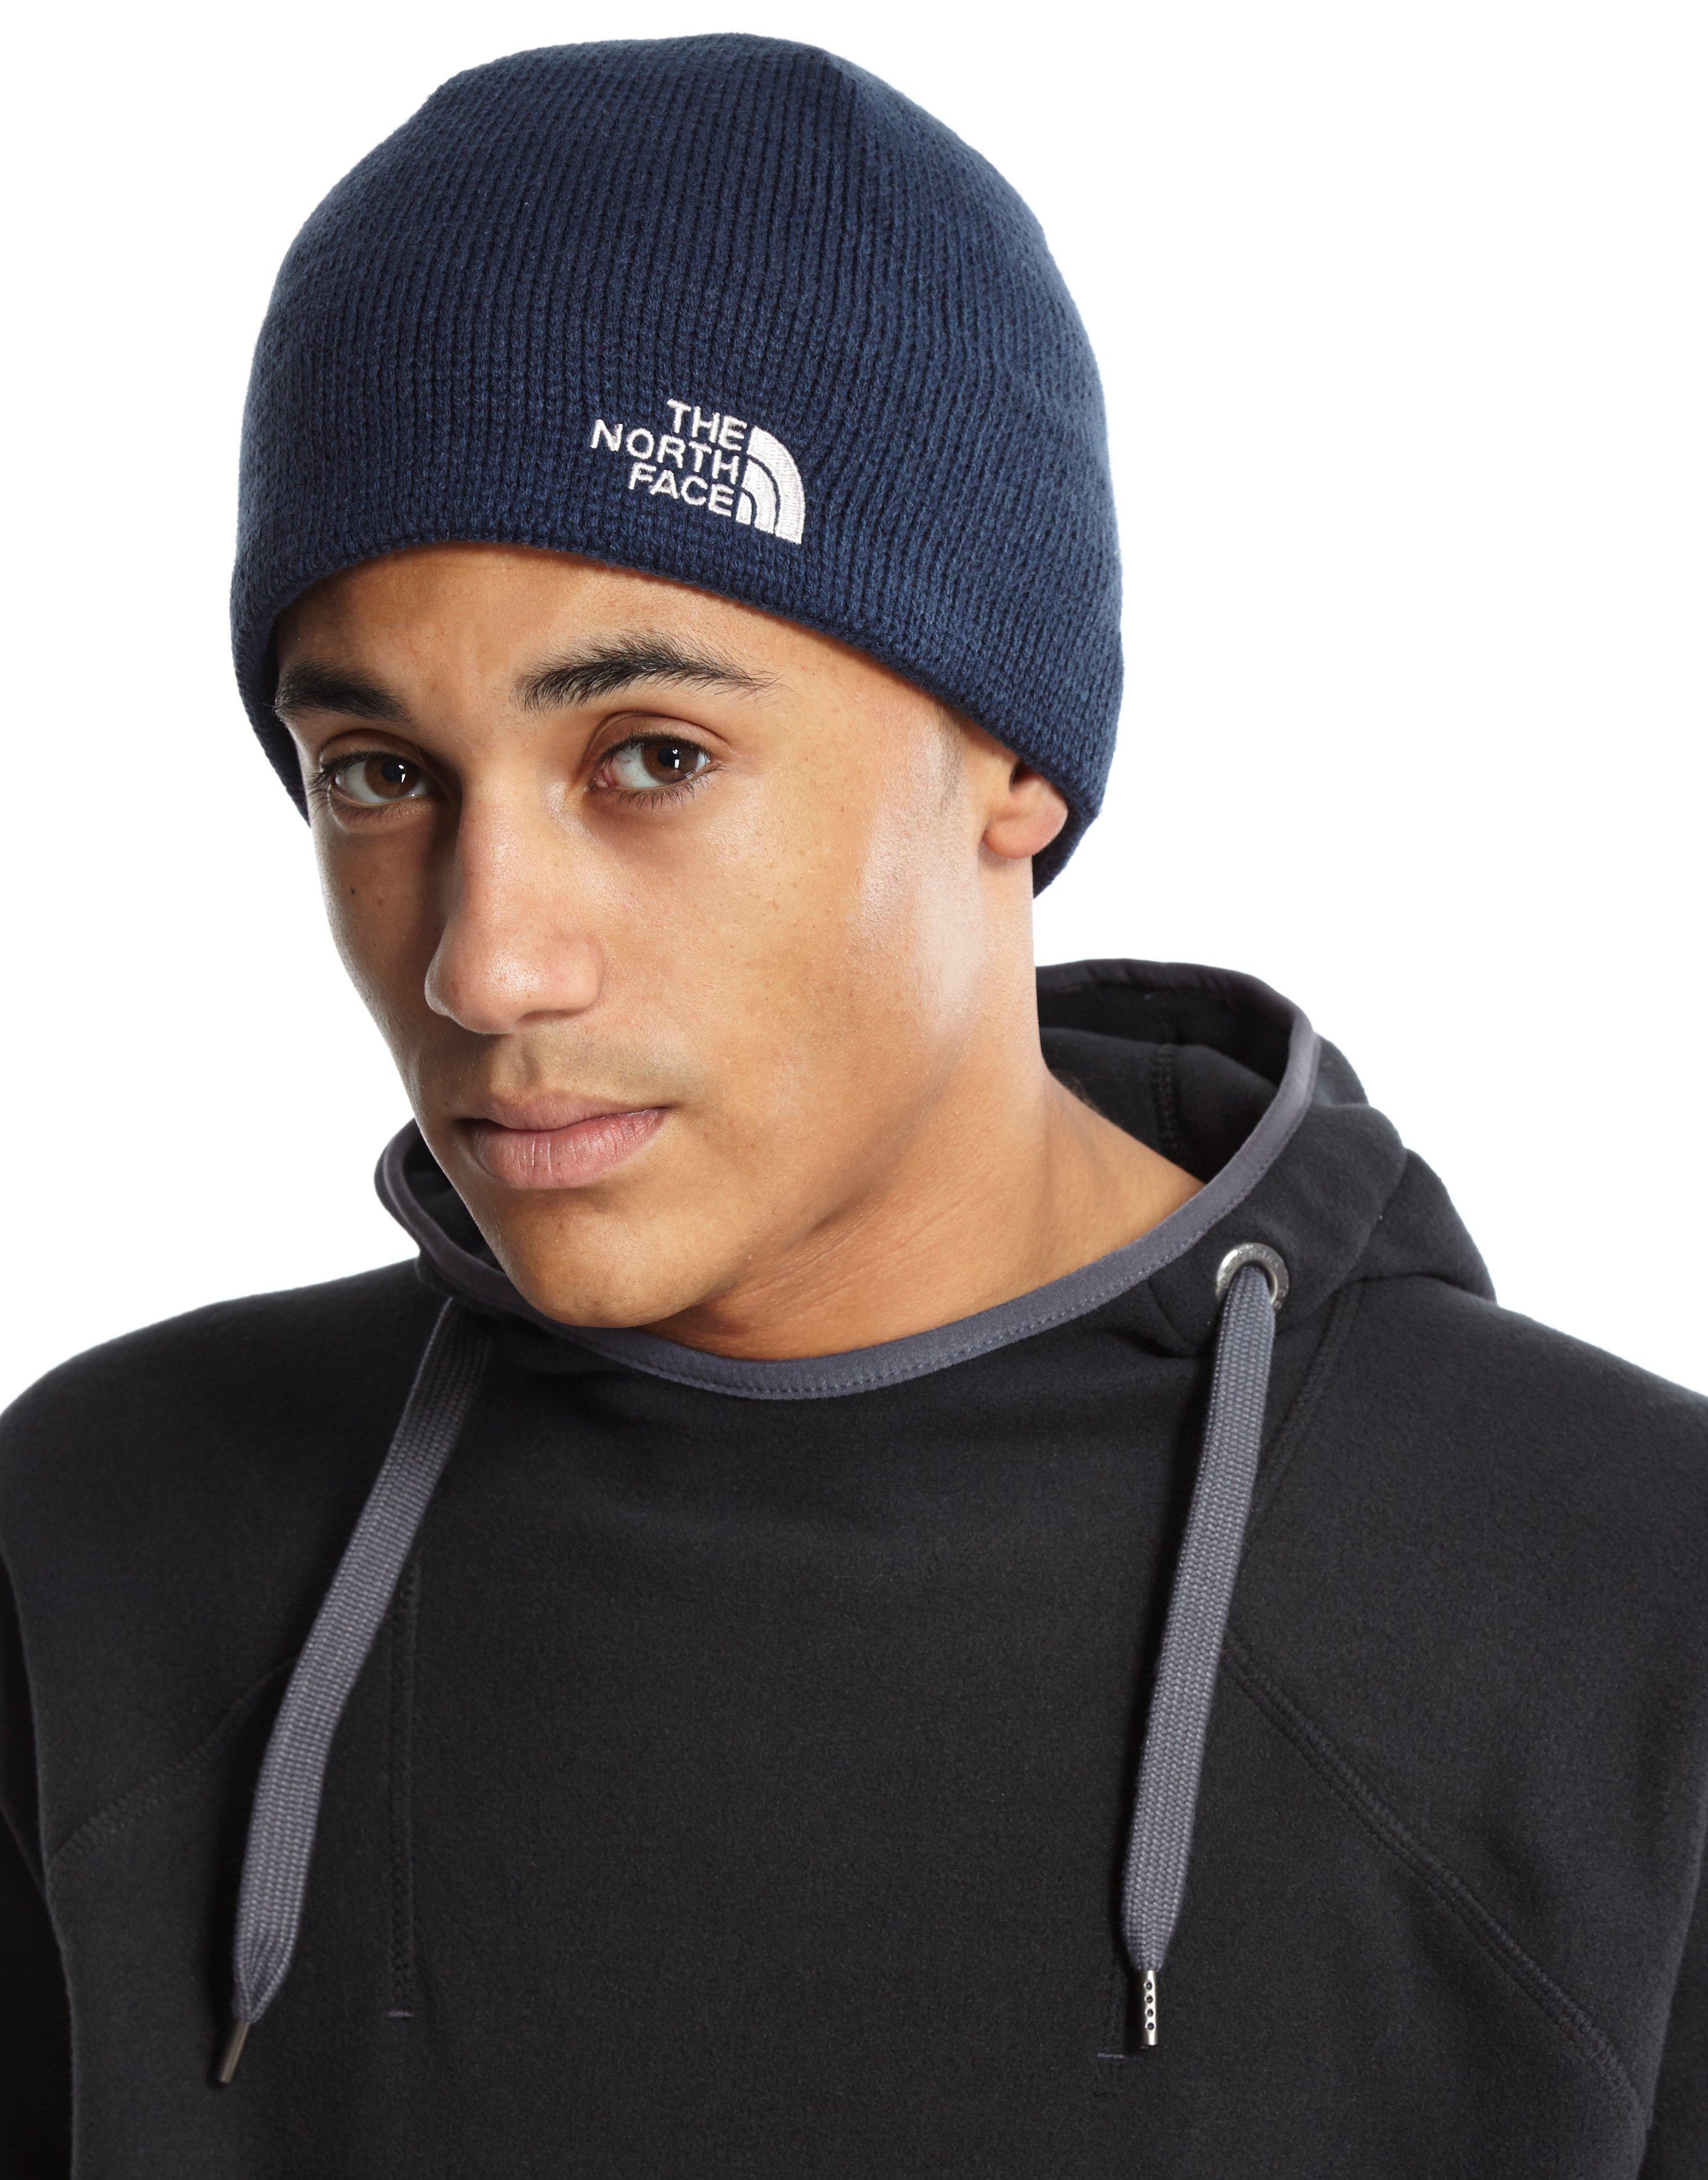 The North Face Synthetic Bones Beanie Hat in Navy (Blue) for Men - Lyst